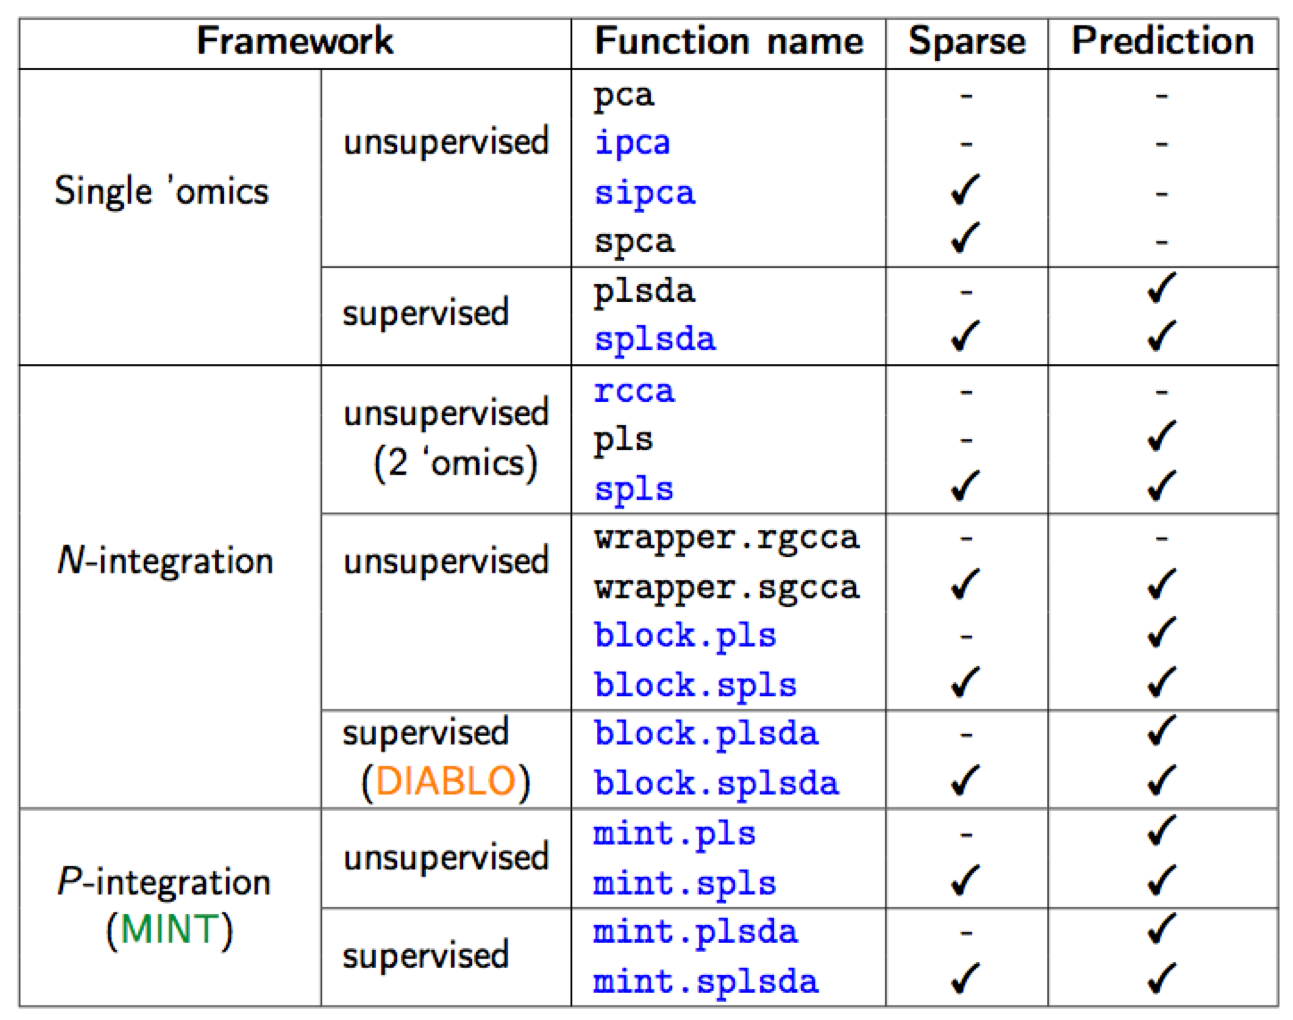 List of methods in mixOmics, sparse indicates methods that perform variable selection